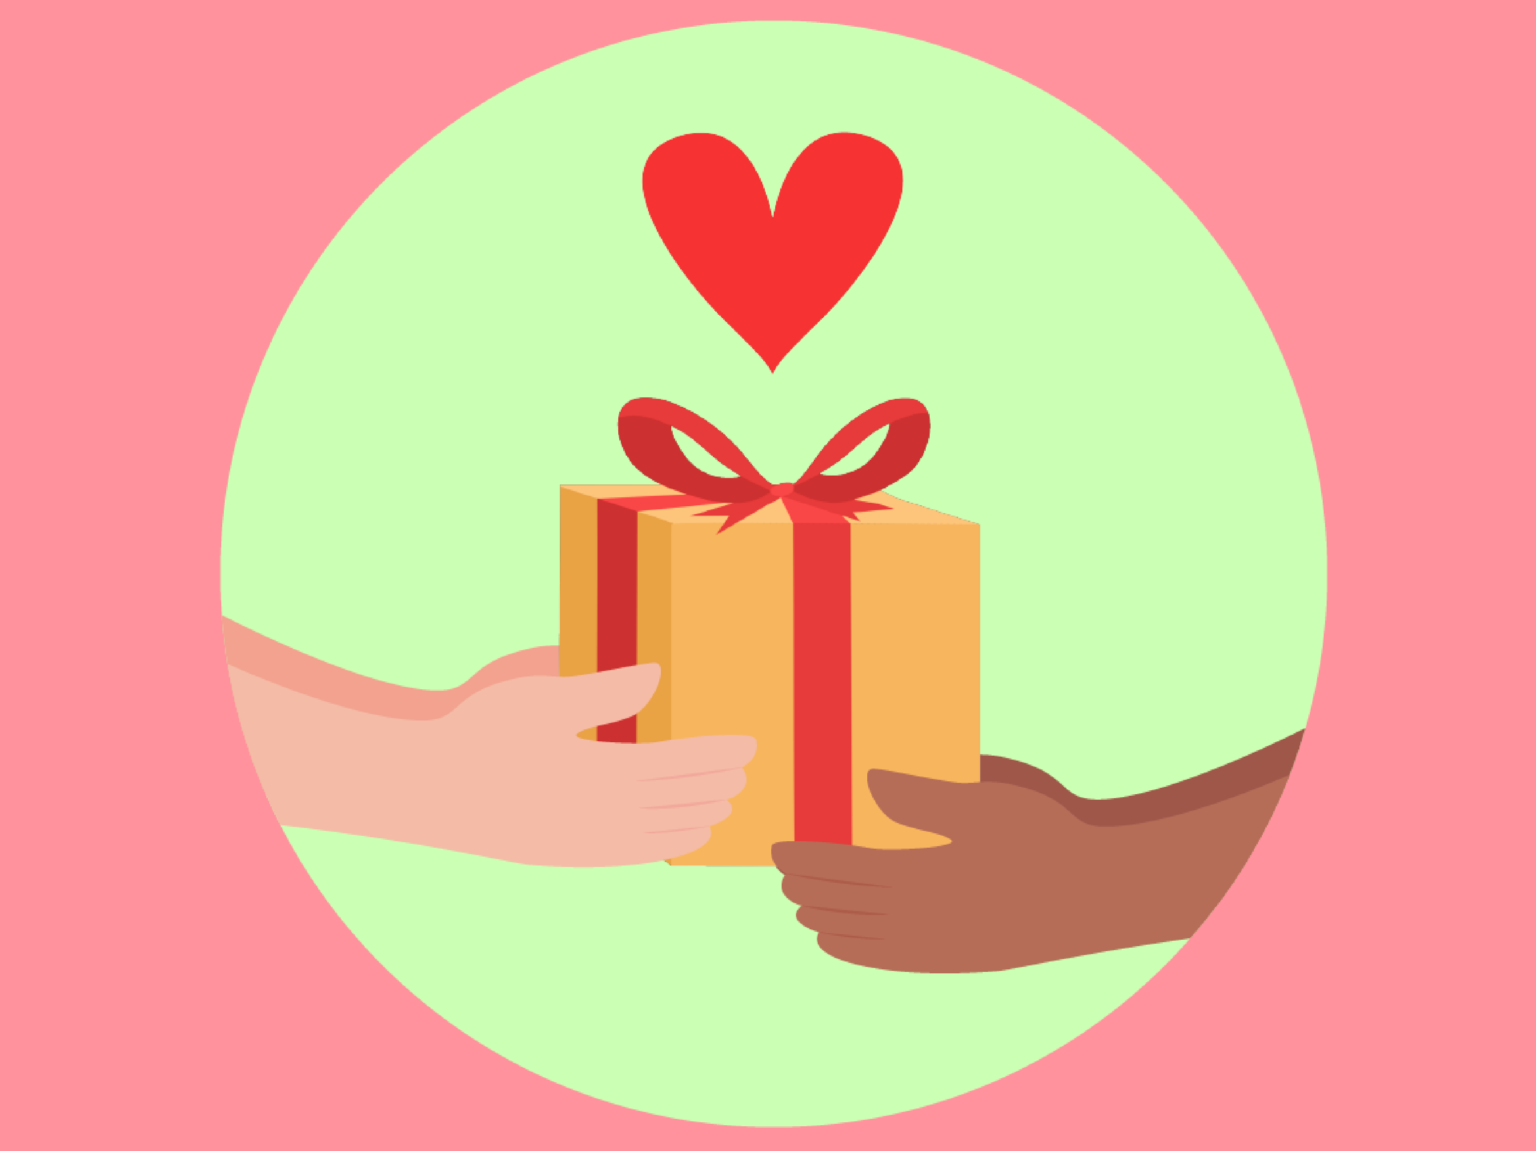 Teaching Children the Joy of Giving - Strategies for Parents